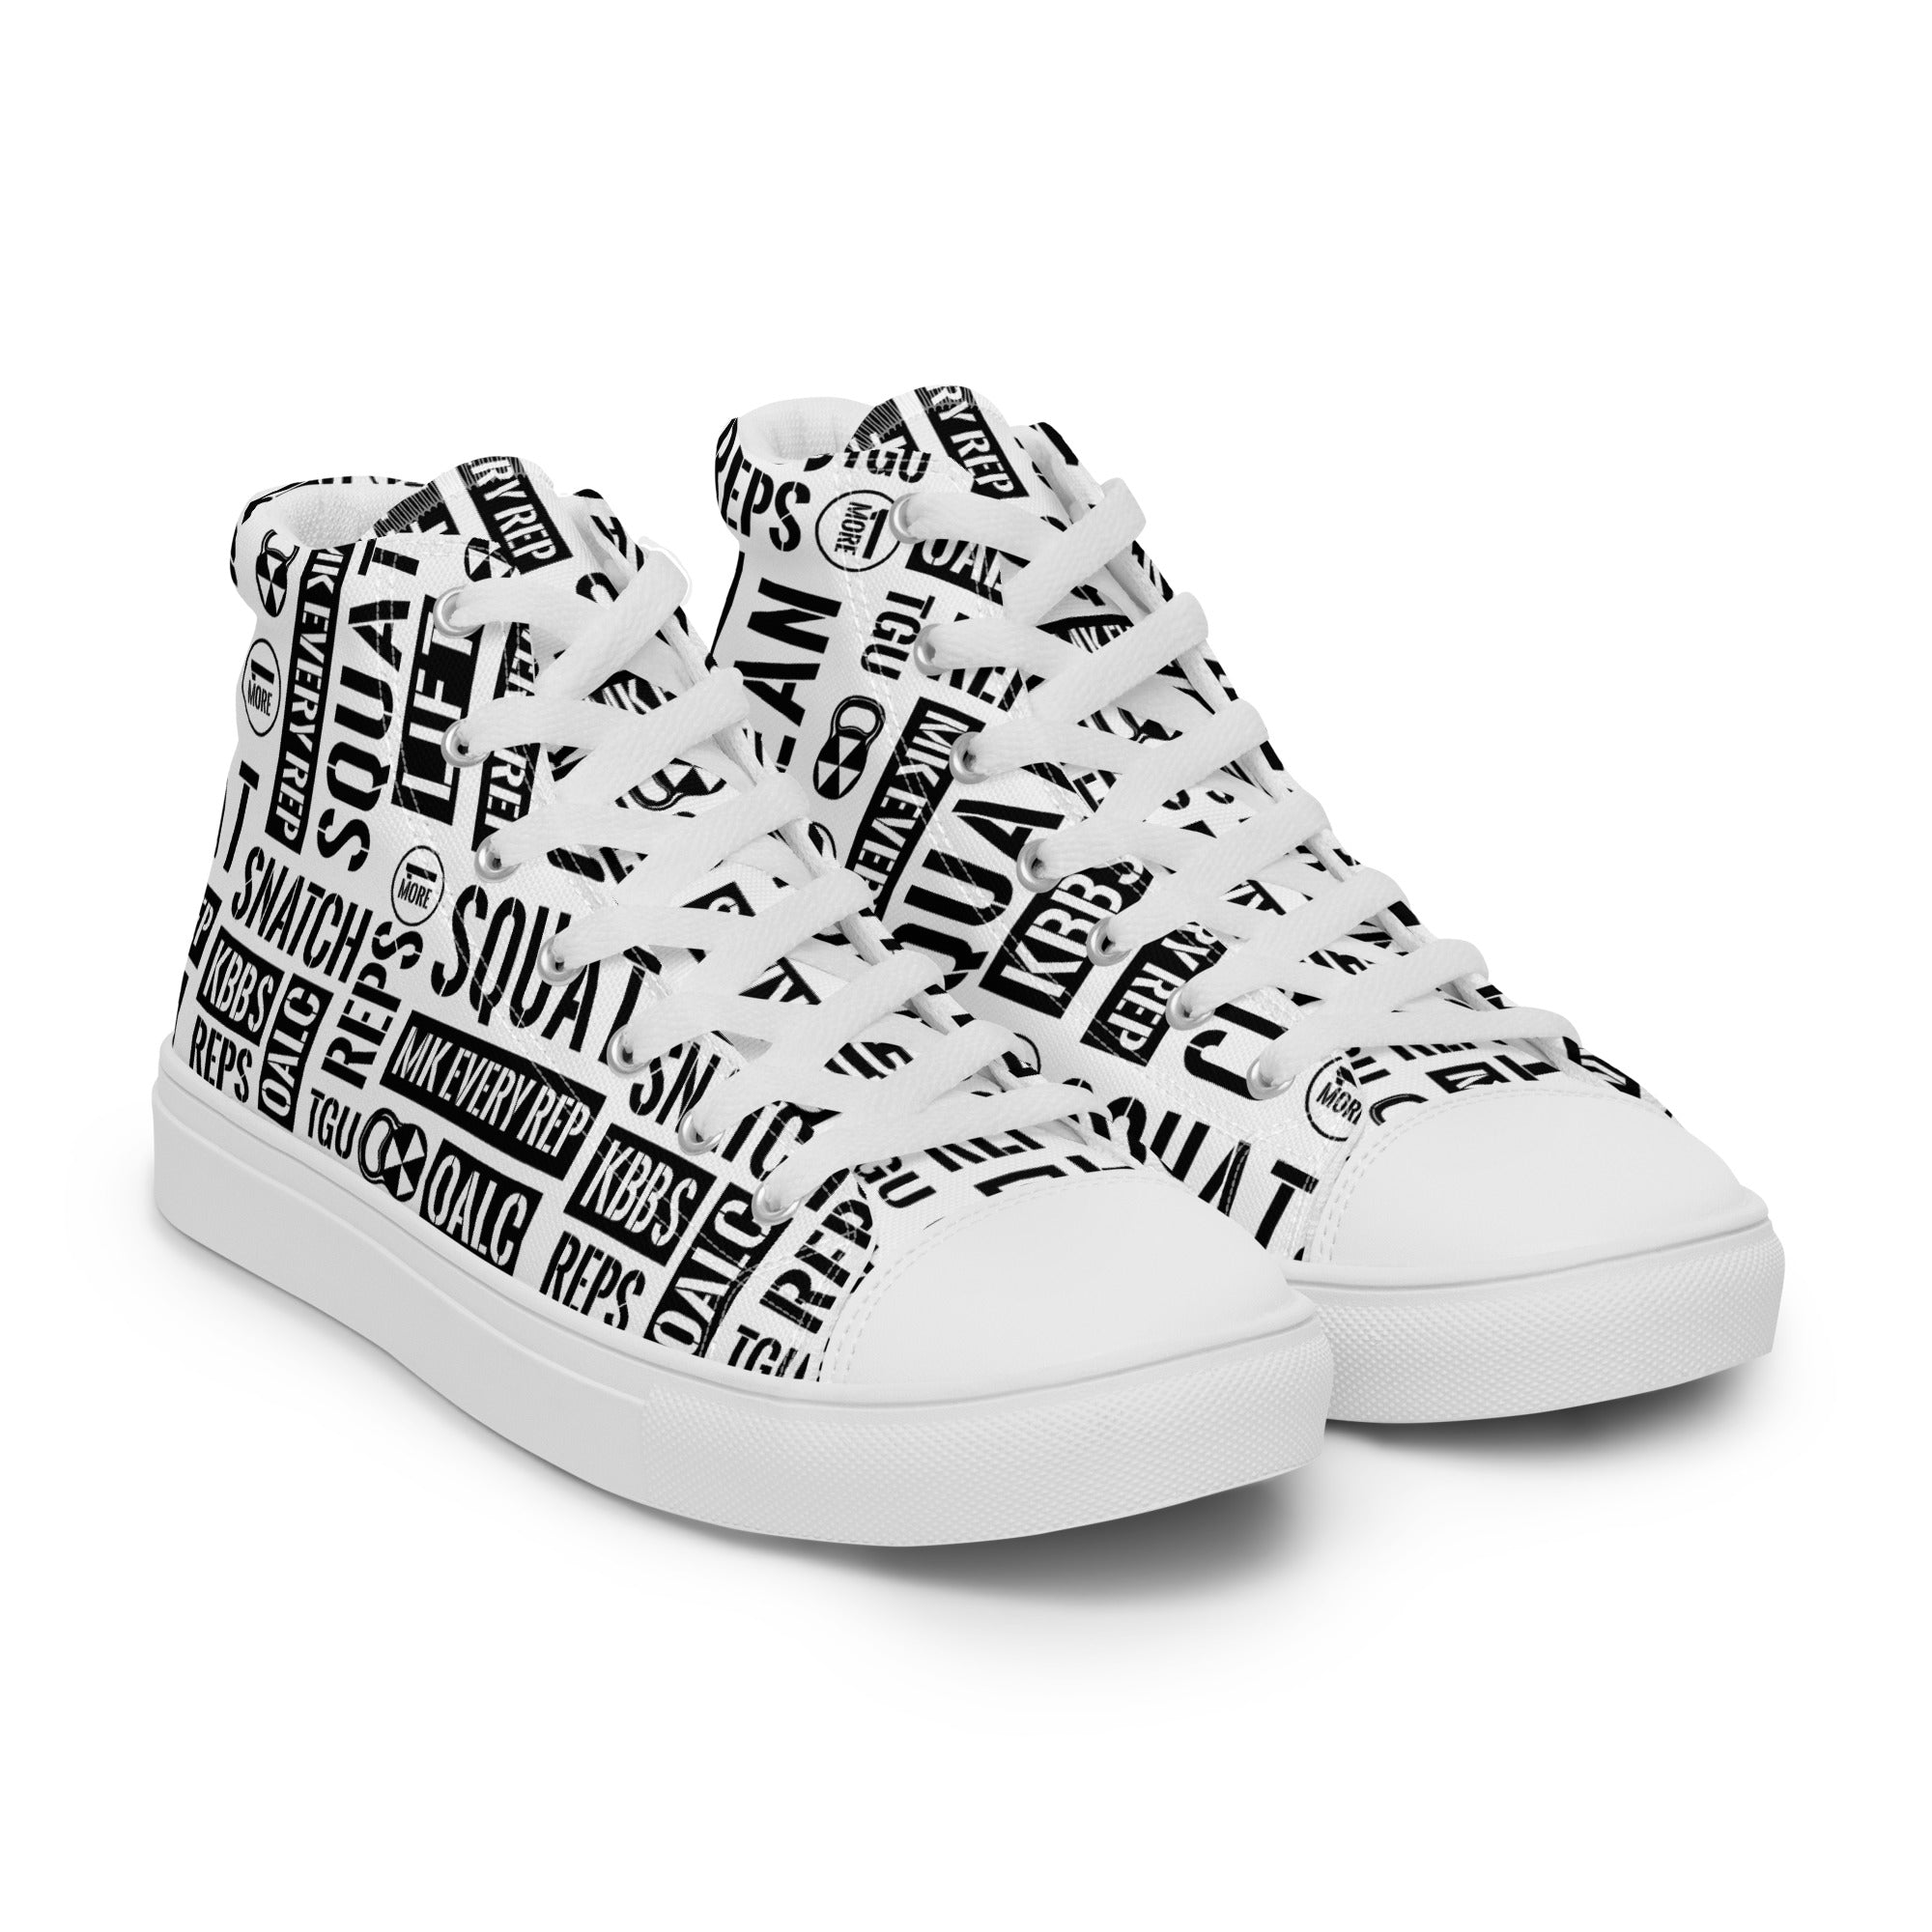 Men’s White Acronyms High Top Canvas Shoes